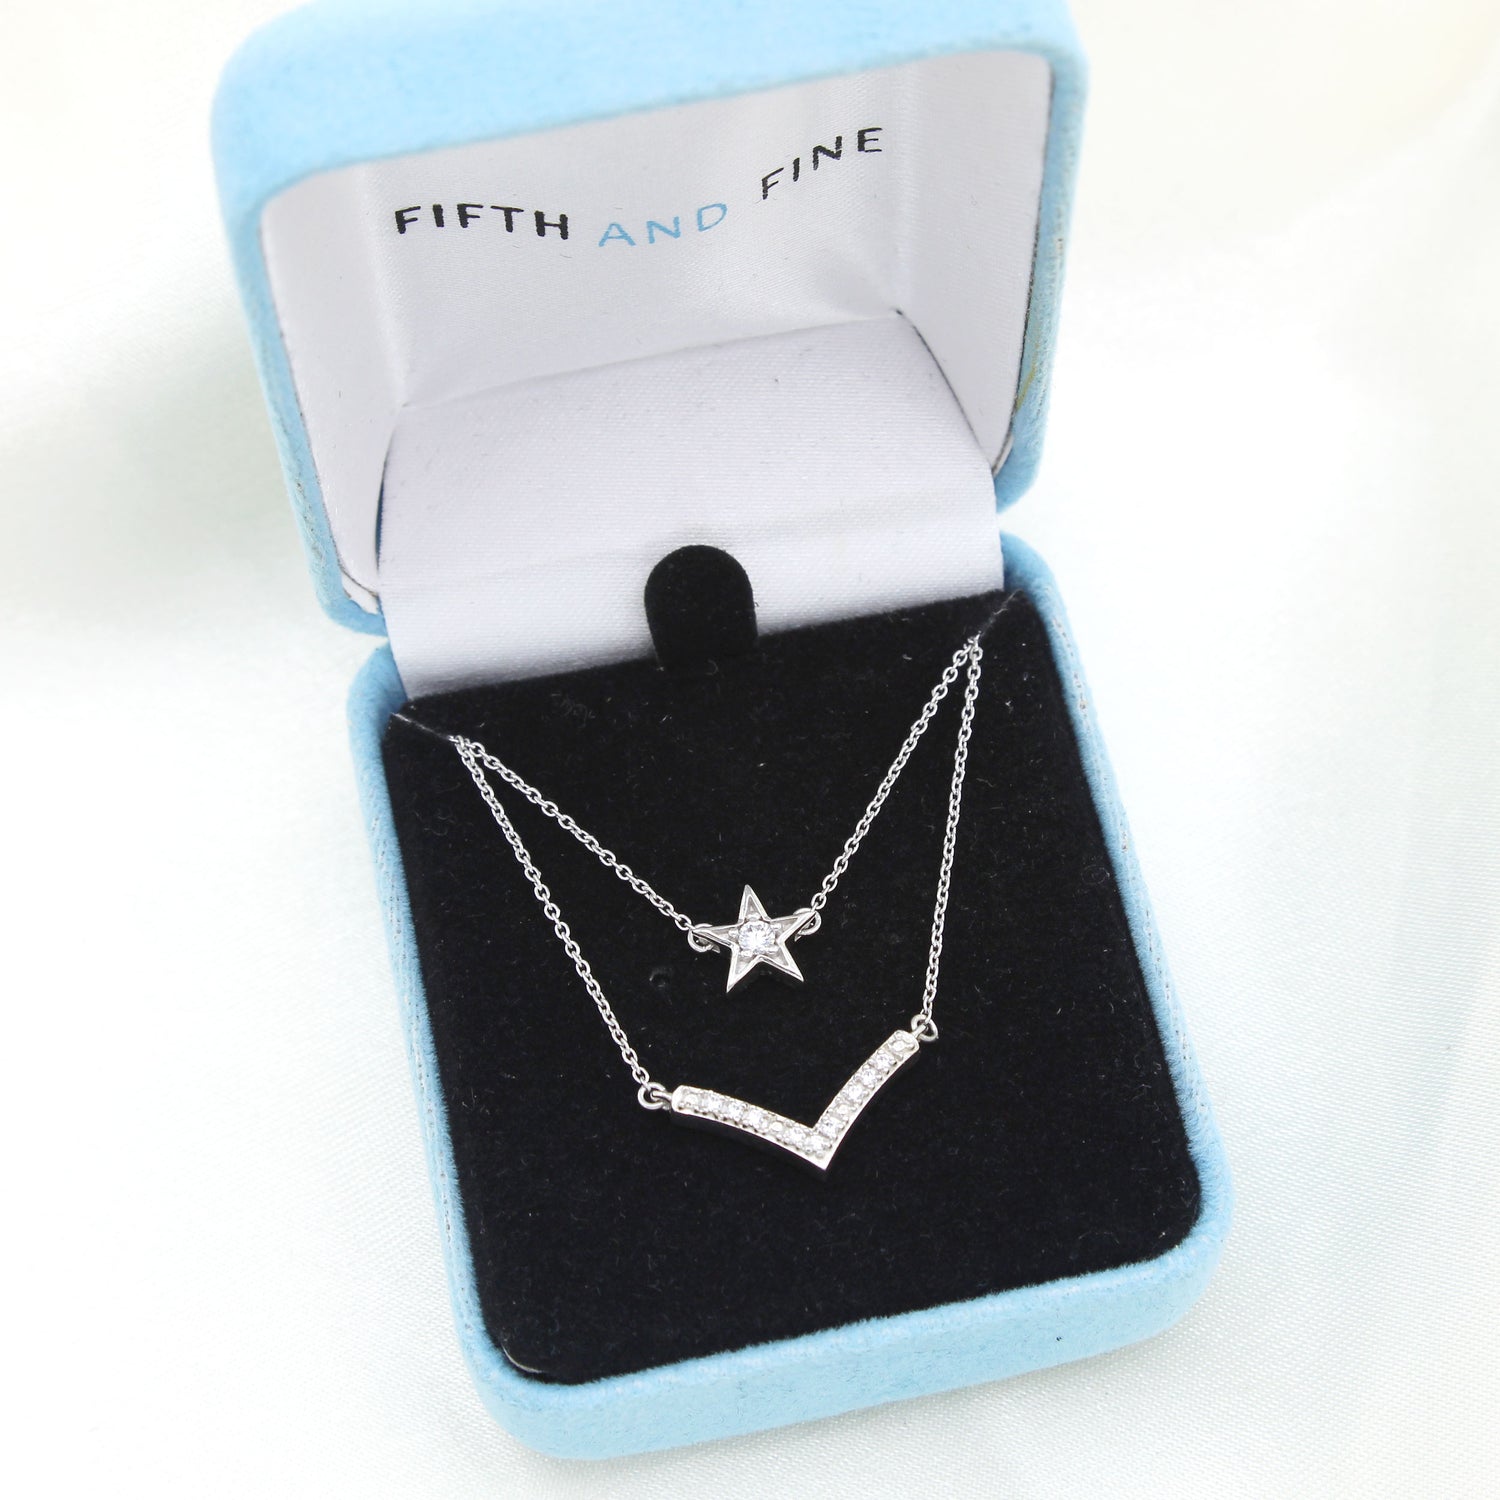 Star and Chevron Layered 1/10 Cttw Natural Diamond Pendant Necklace set in 925 Sterling Silver… jewelry gift